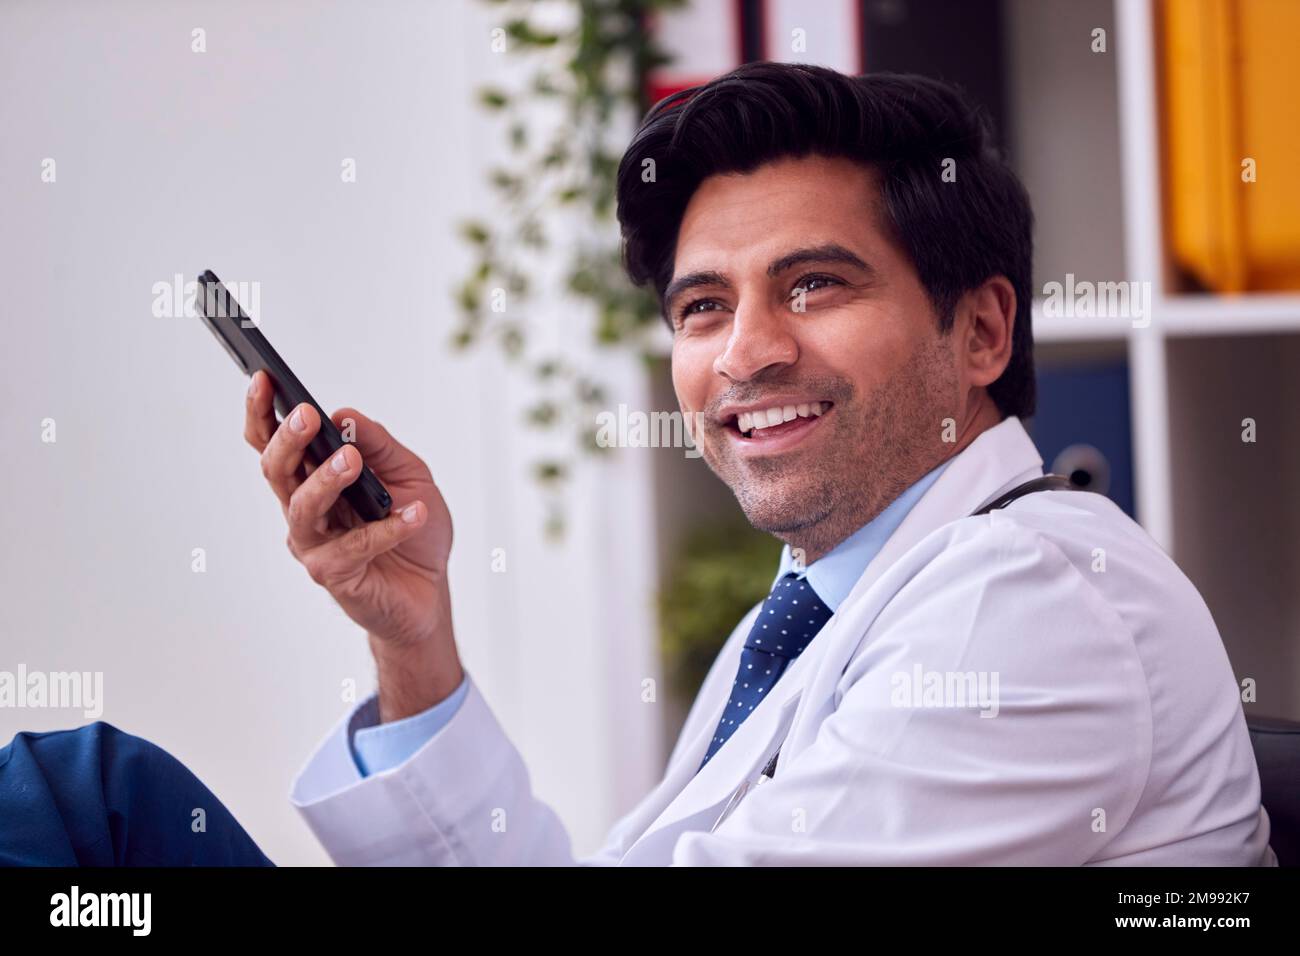 Smiling Male Doctor Or GP Wearing White Coat Sitting At Desk In Office With Mobile Phone Stock Photo